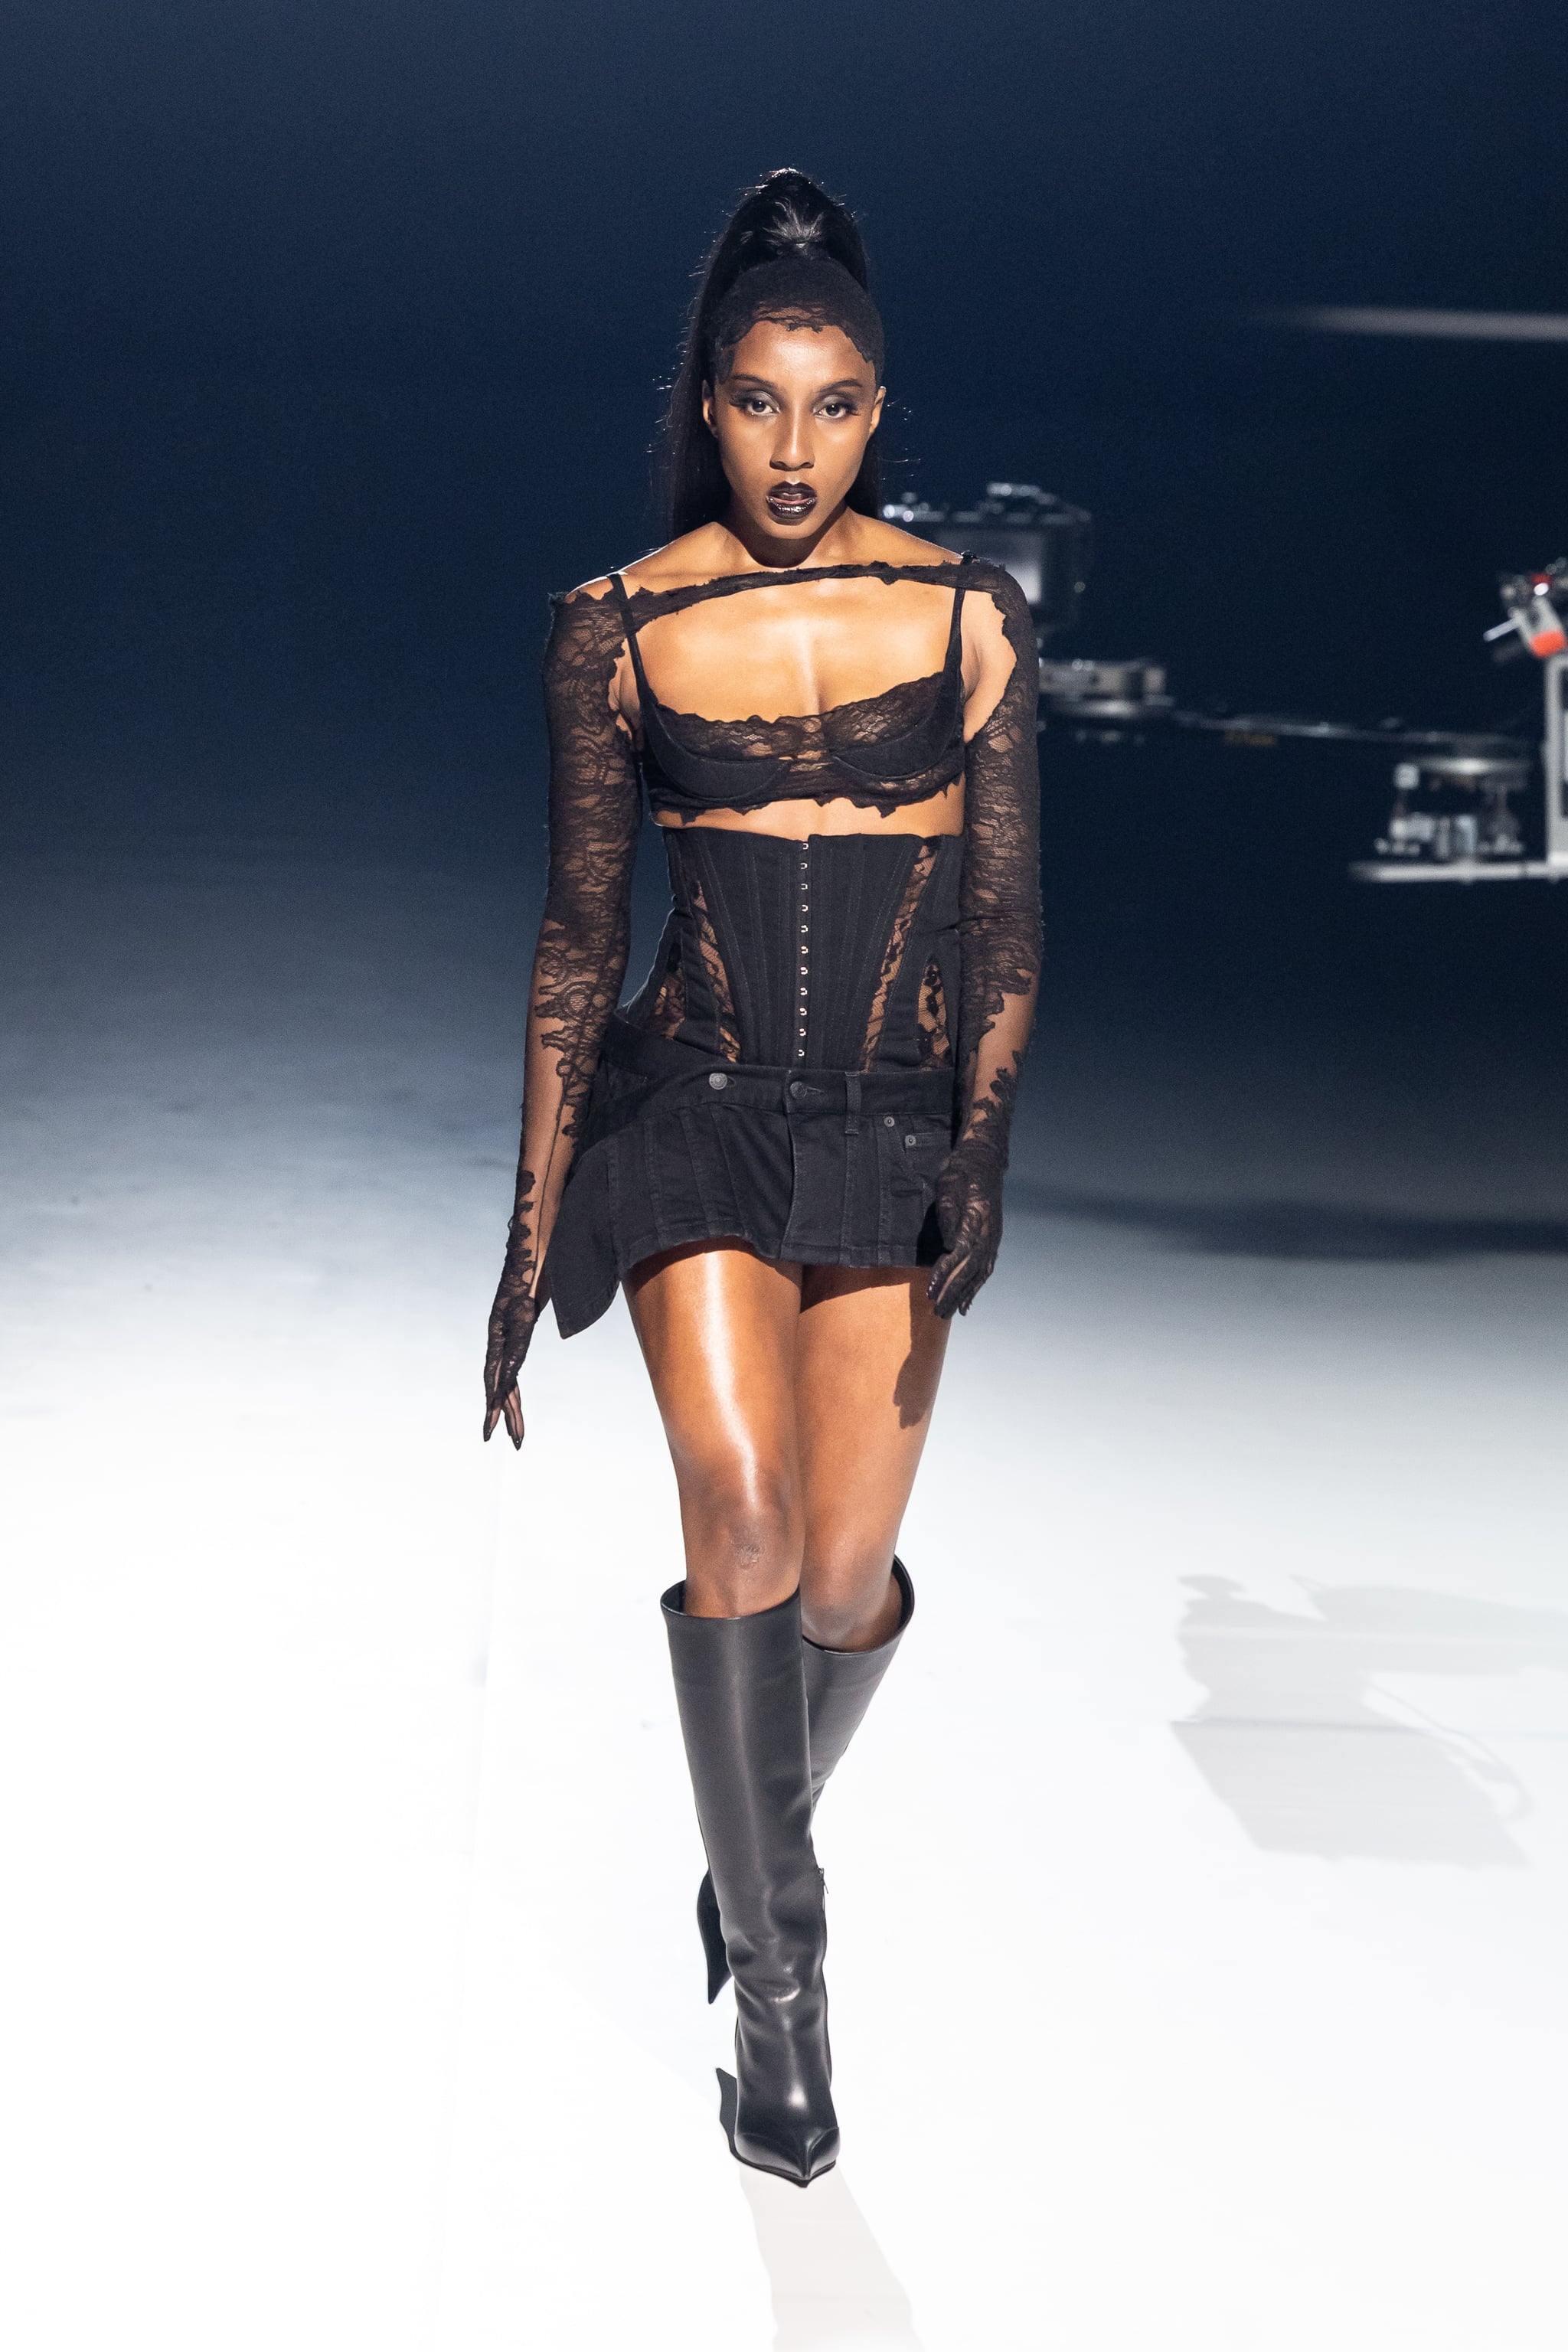 Fashion, Shopping & Style  Ziwe Makes Her Runway Debut in a Lacy